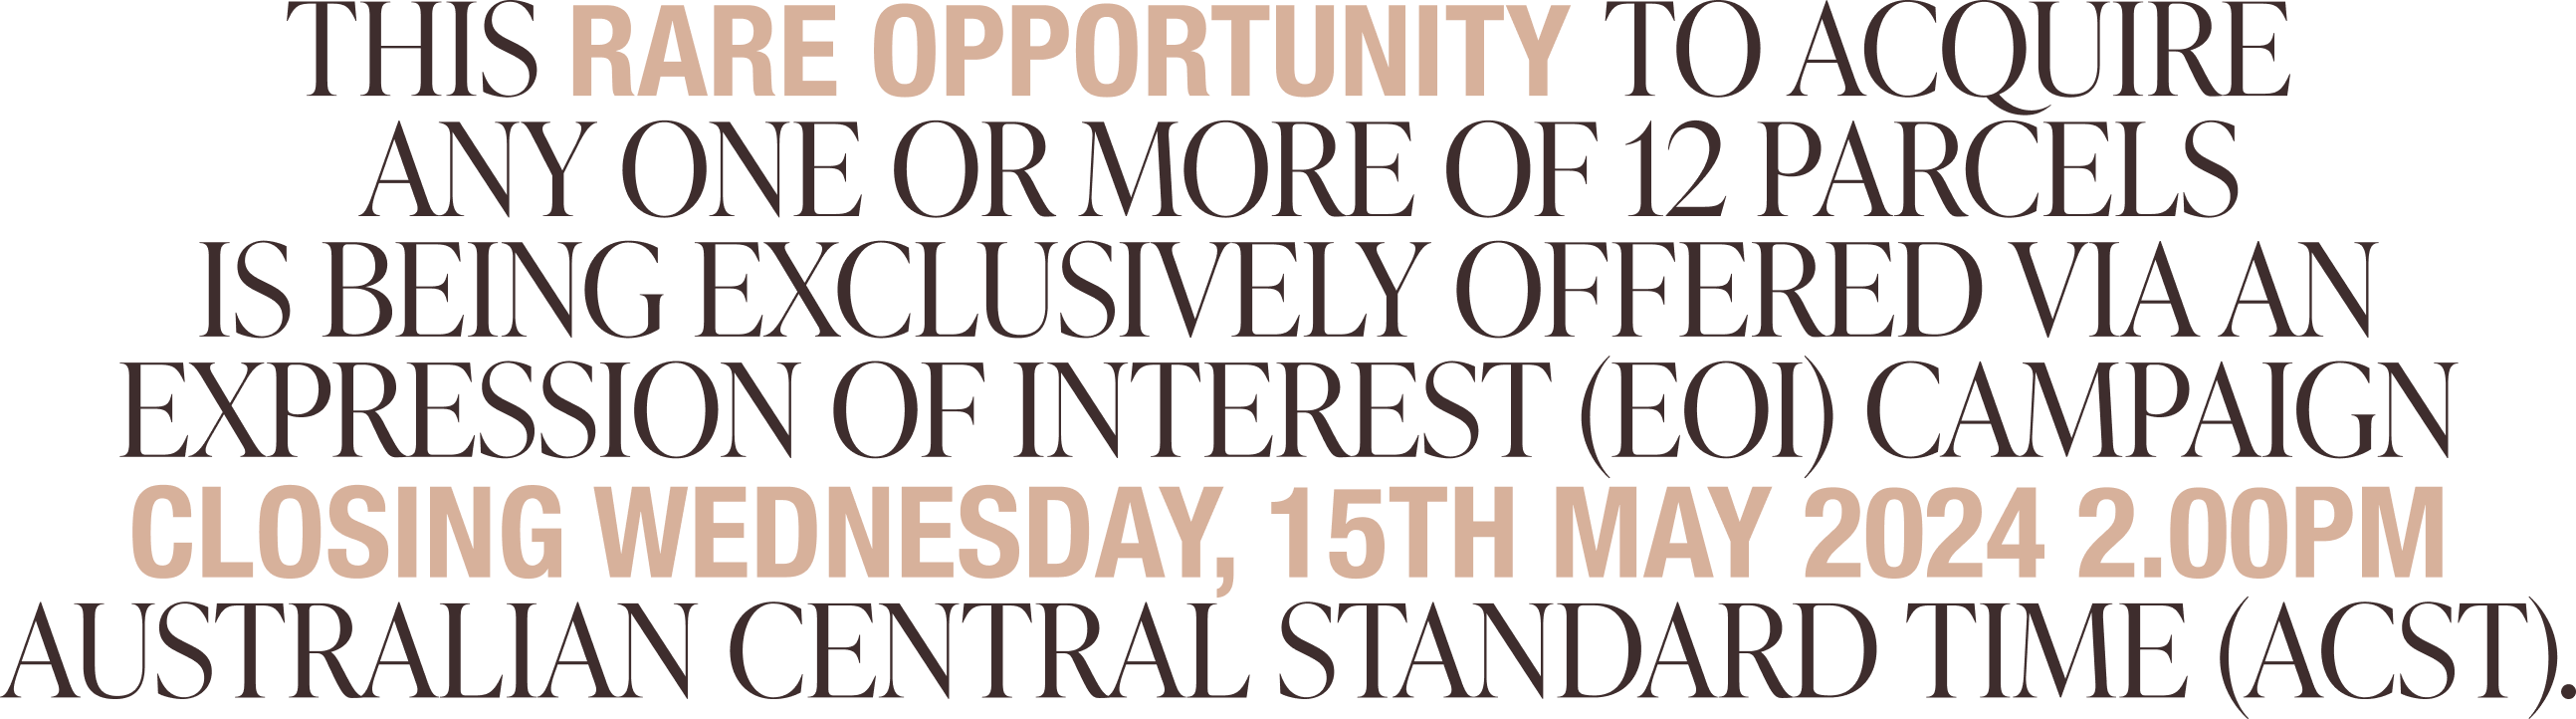 This rare opportunity to acquire any one or more of 12 parcels is being exclusively offered via an expression of interest (EOI) campaign closing Wednesday, 15th May 2024 2.00PM Australian Central Standard Time (ACST)